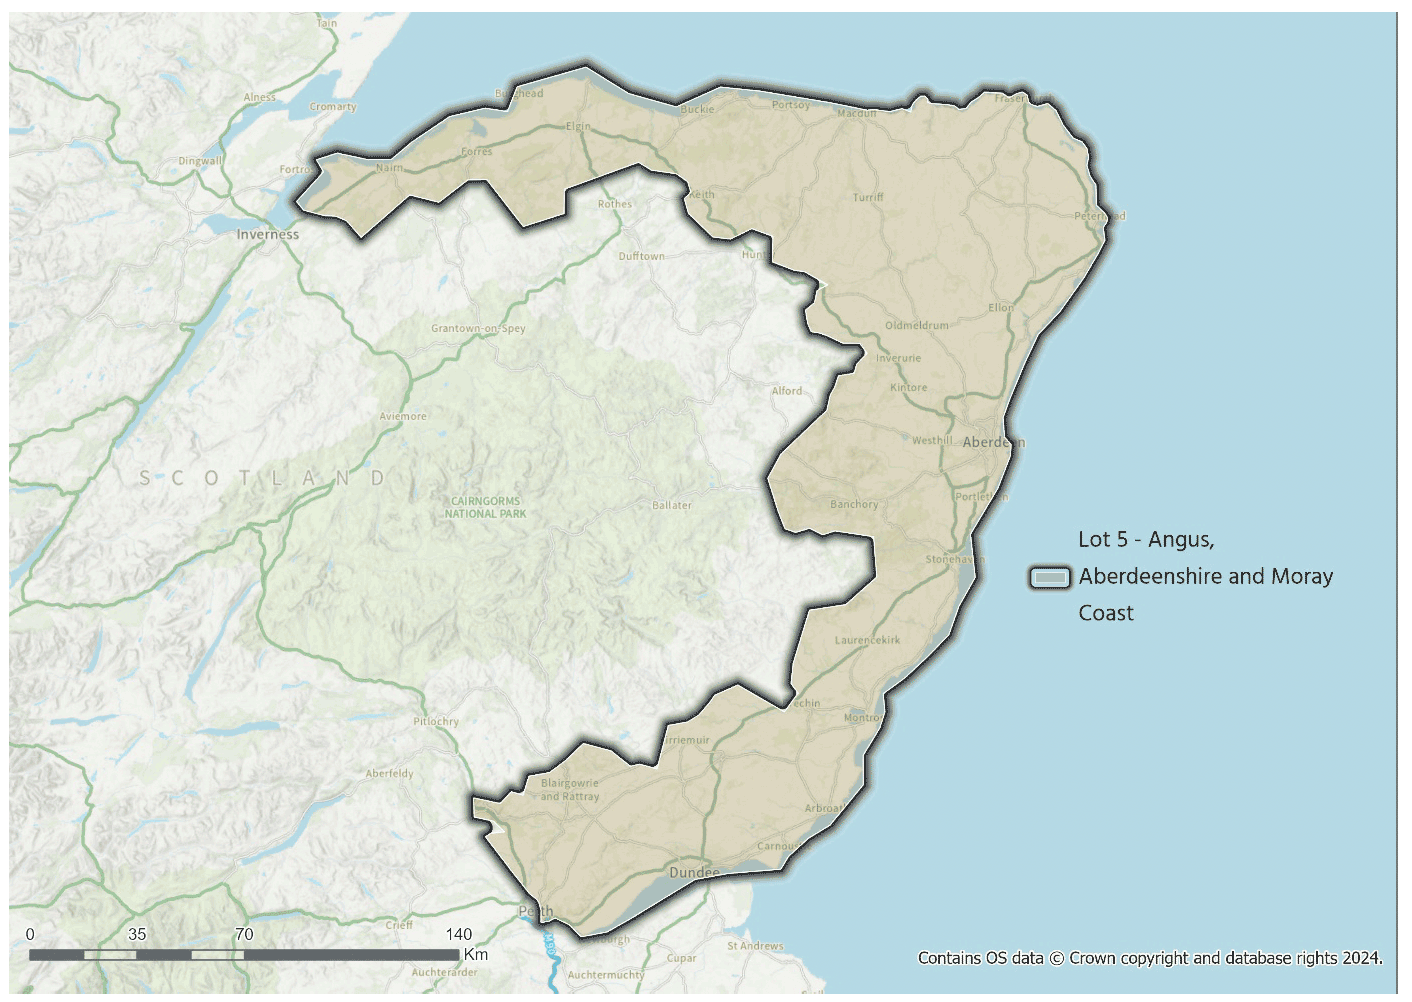 A map showing the Lot 5 procurement area covering parts of Perth and Kinross, Dundee, Angus, Aberdeen City, Aberdeenshire, Moray and Highlands.